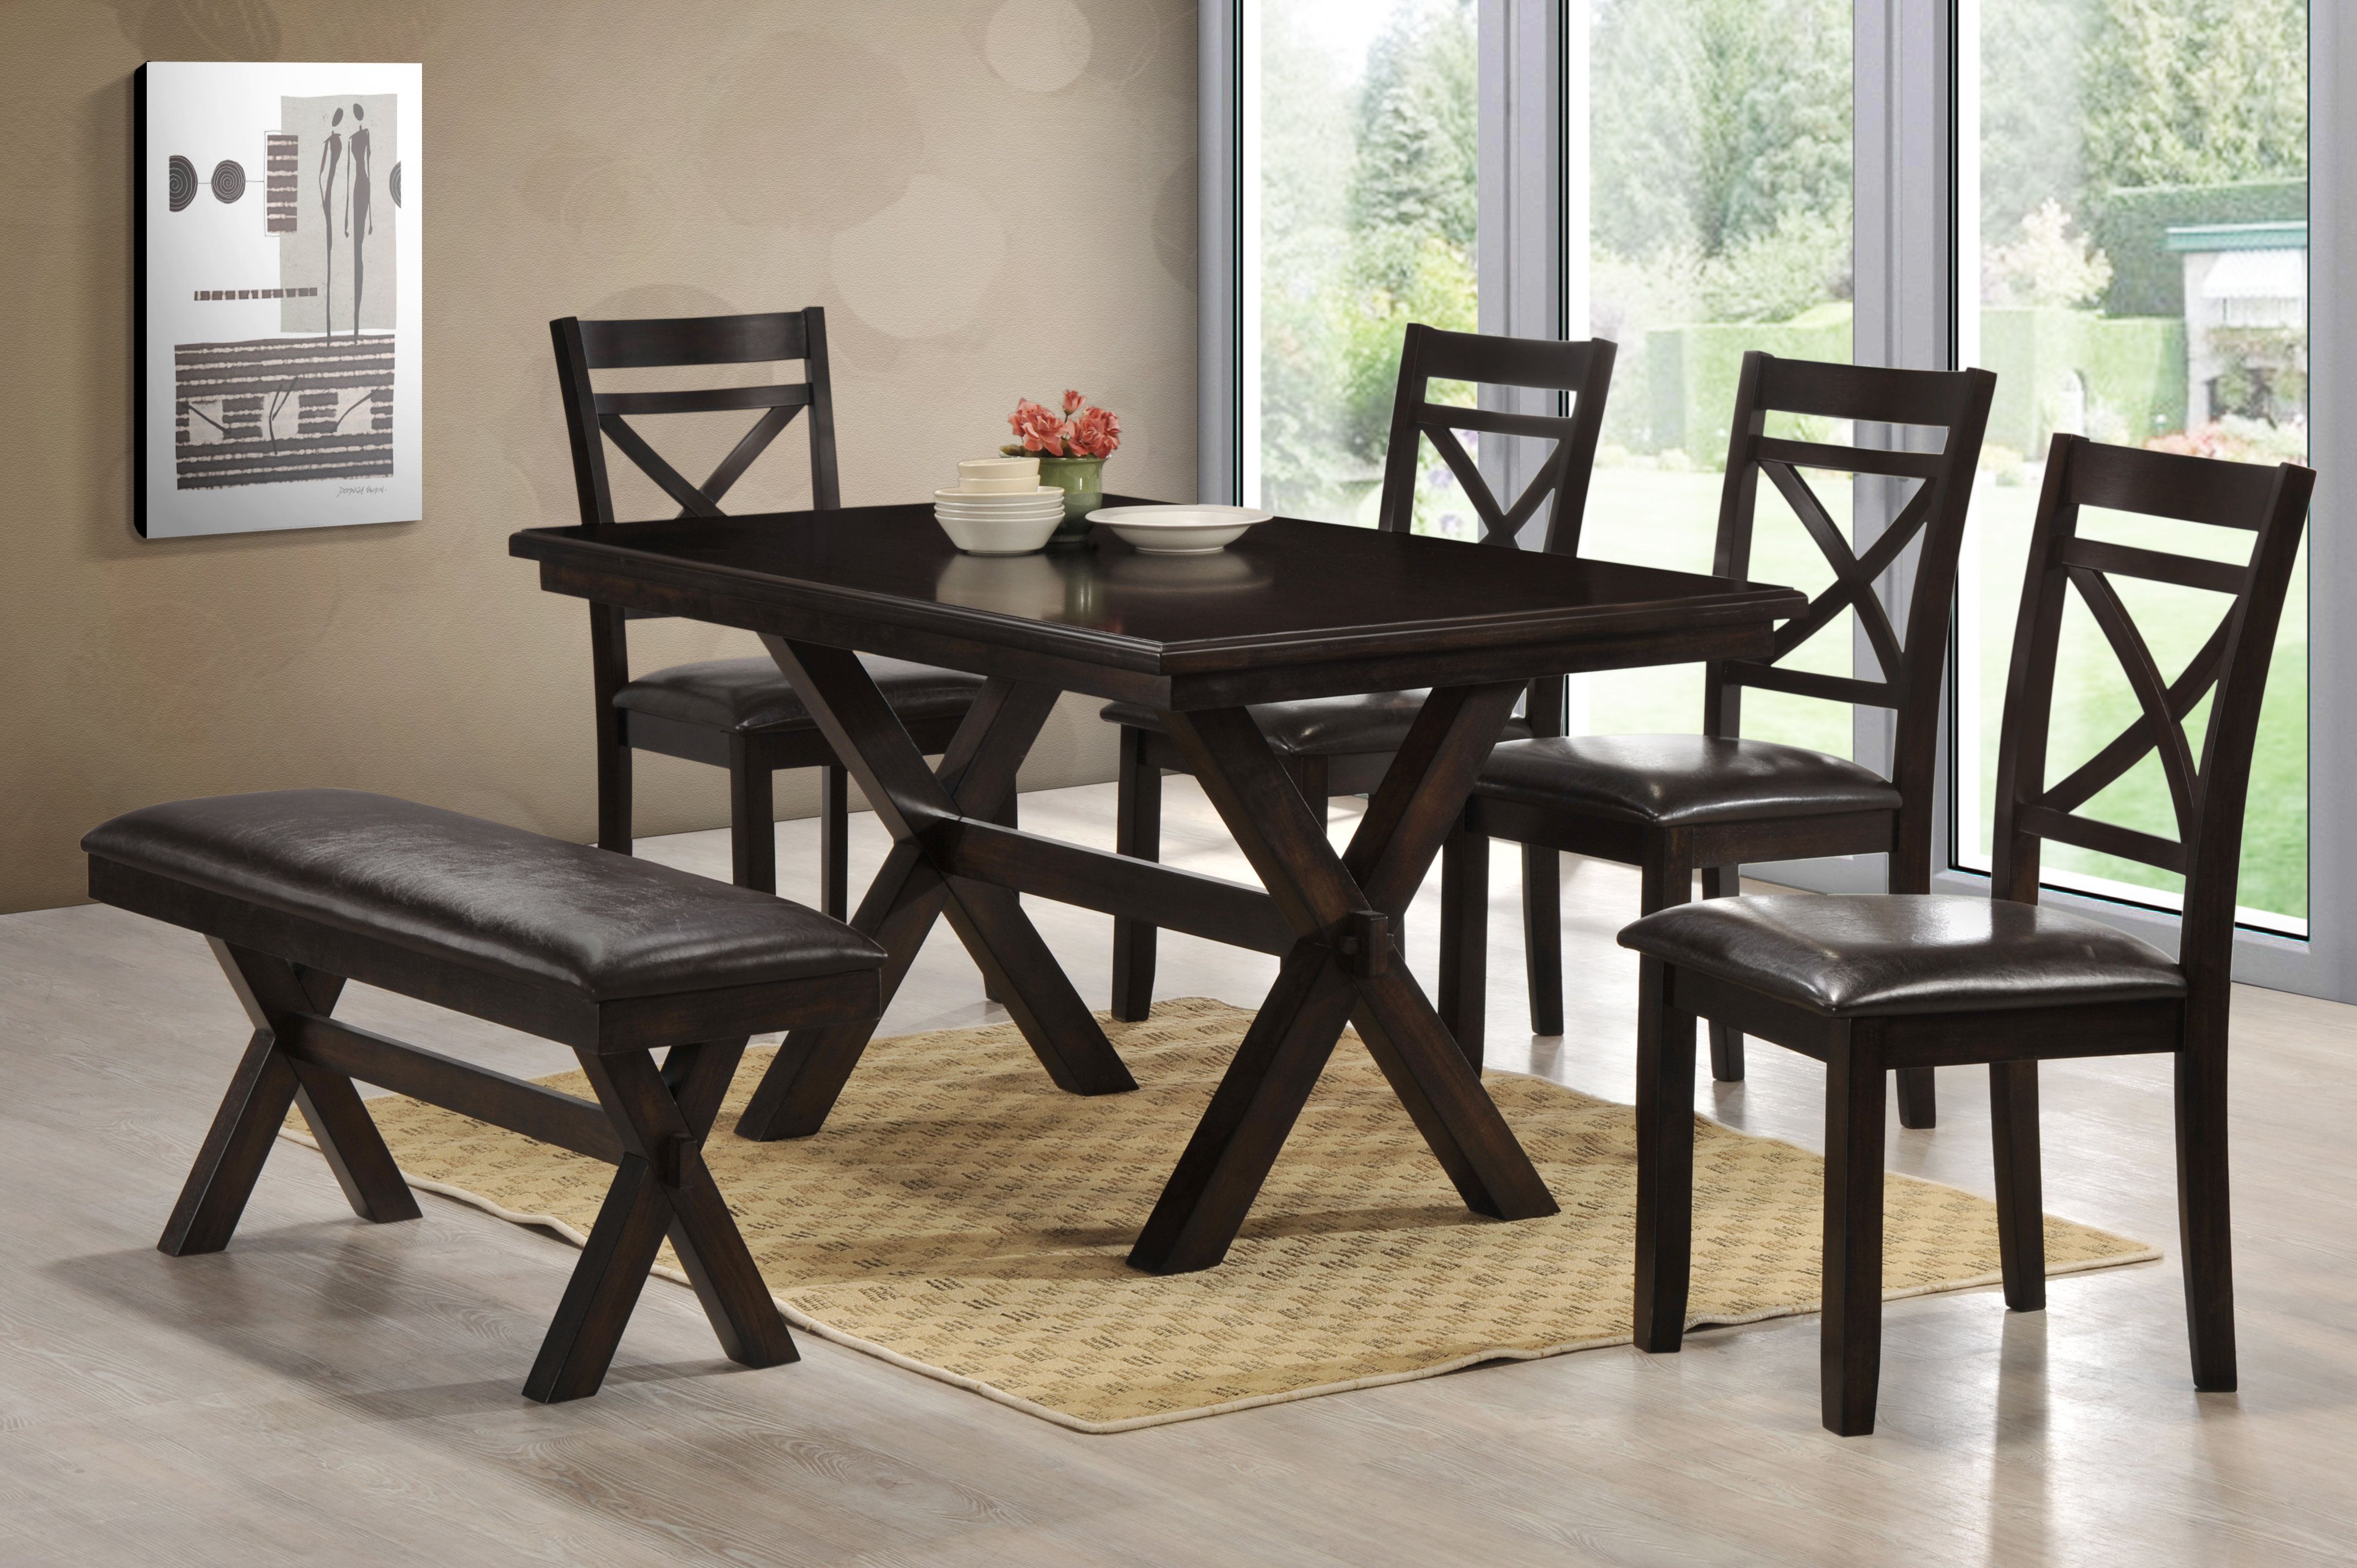 Andover Mills Johanson 6 Piece Dining Set Inside Best And Newest Reinert 5 Piece Dining Sets (View 11 of 20)